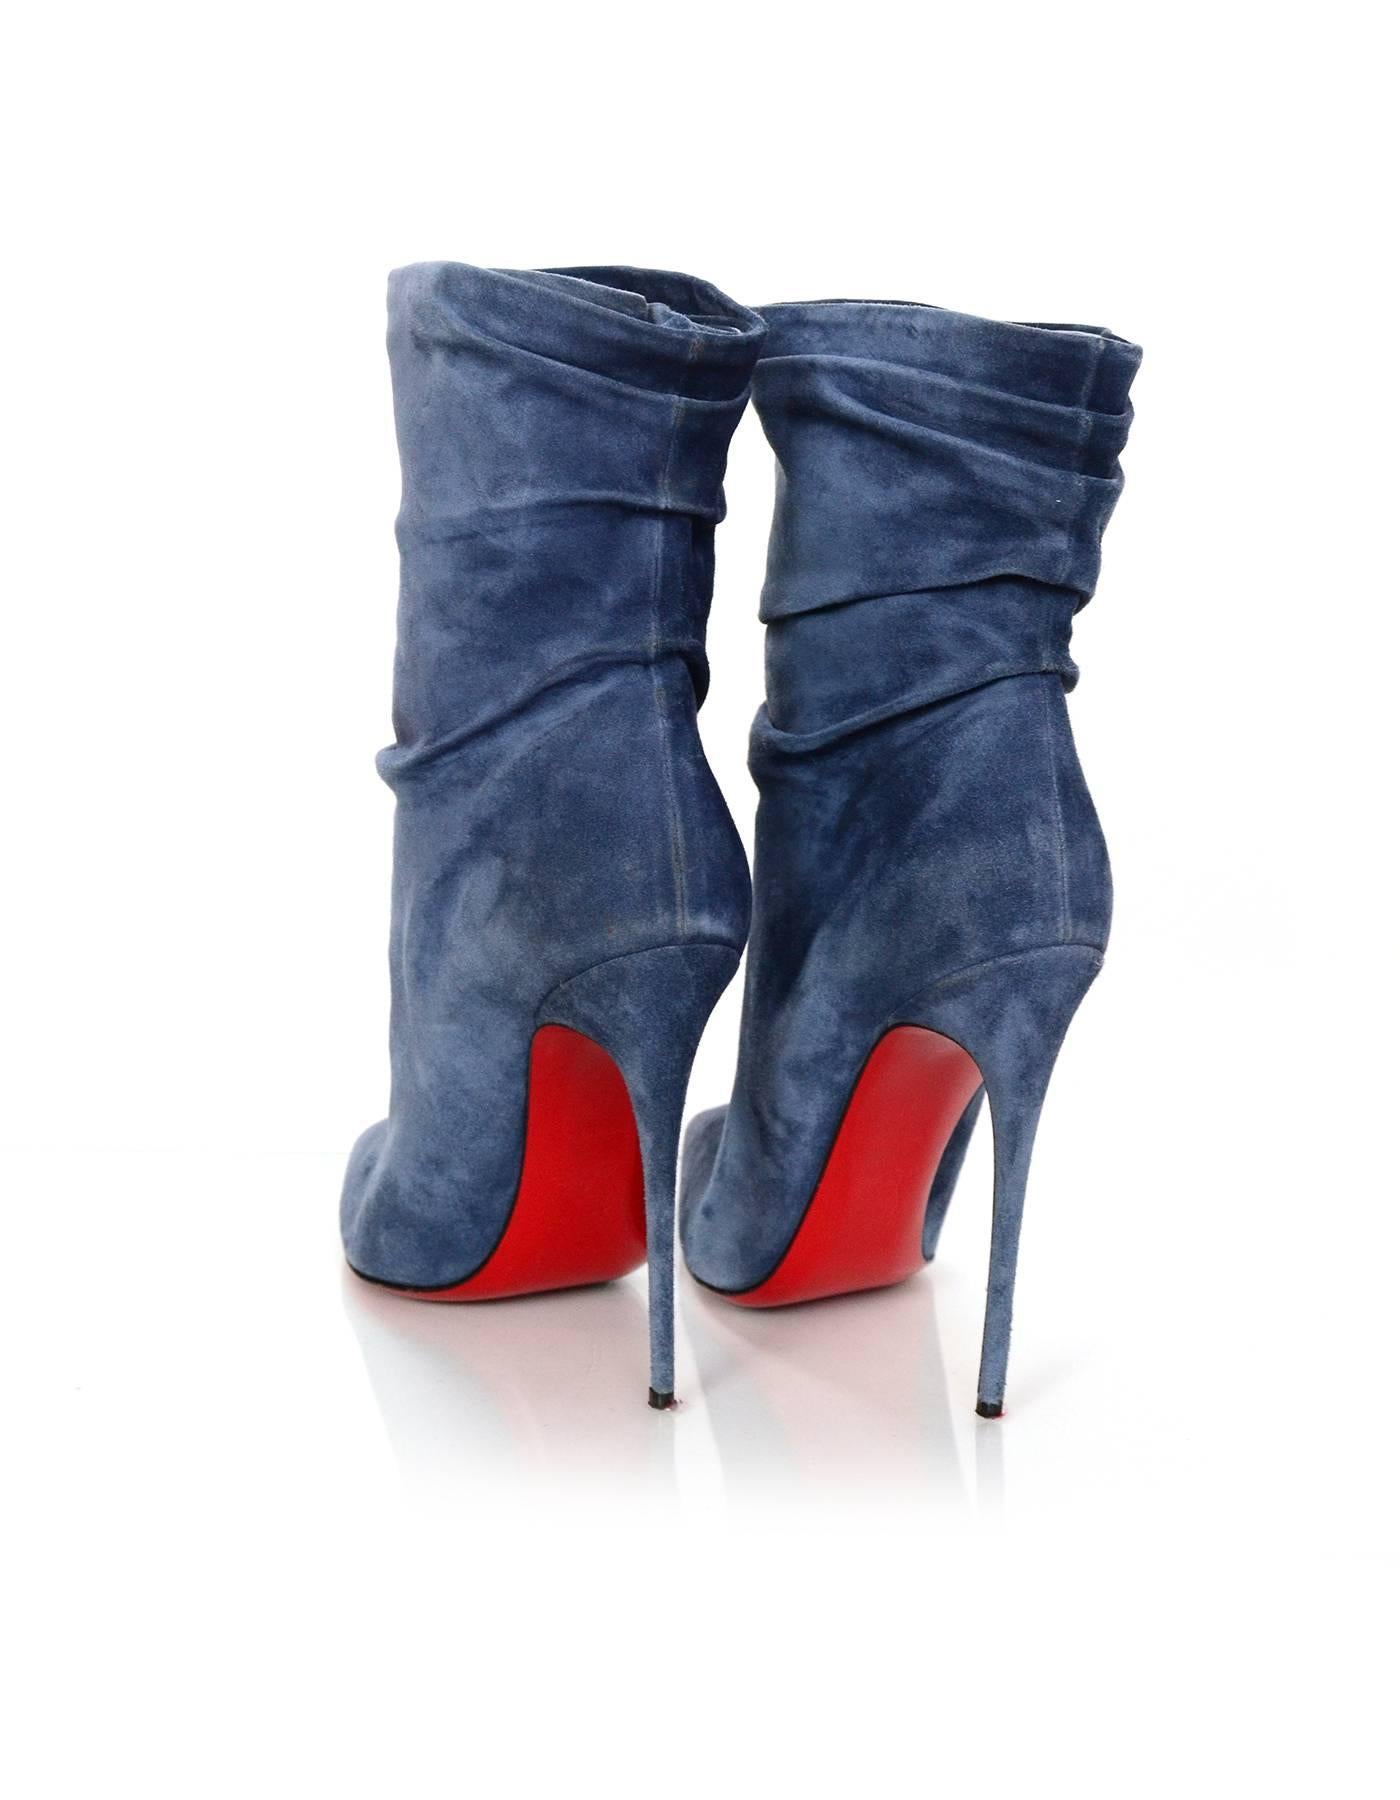 Christian Louboutin Blue Suede Short Ruched Boots sz 41 w/DB 1